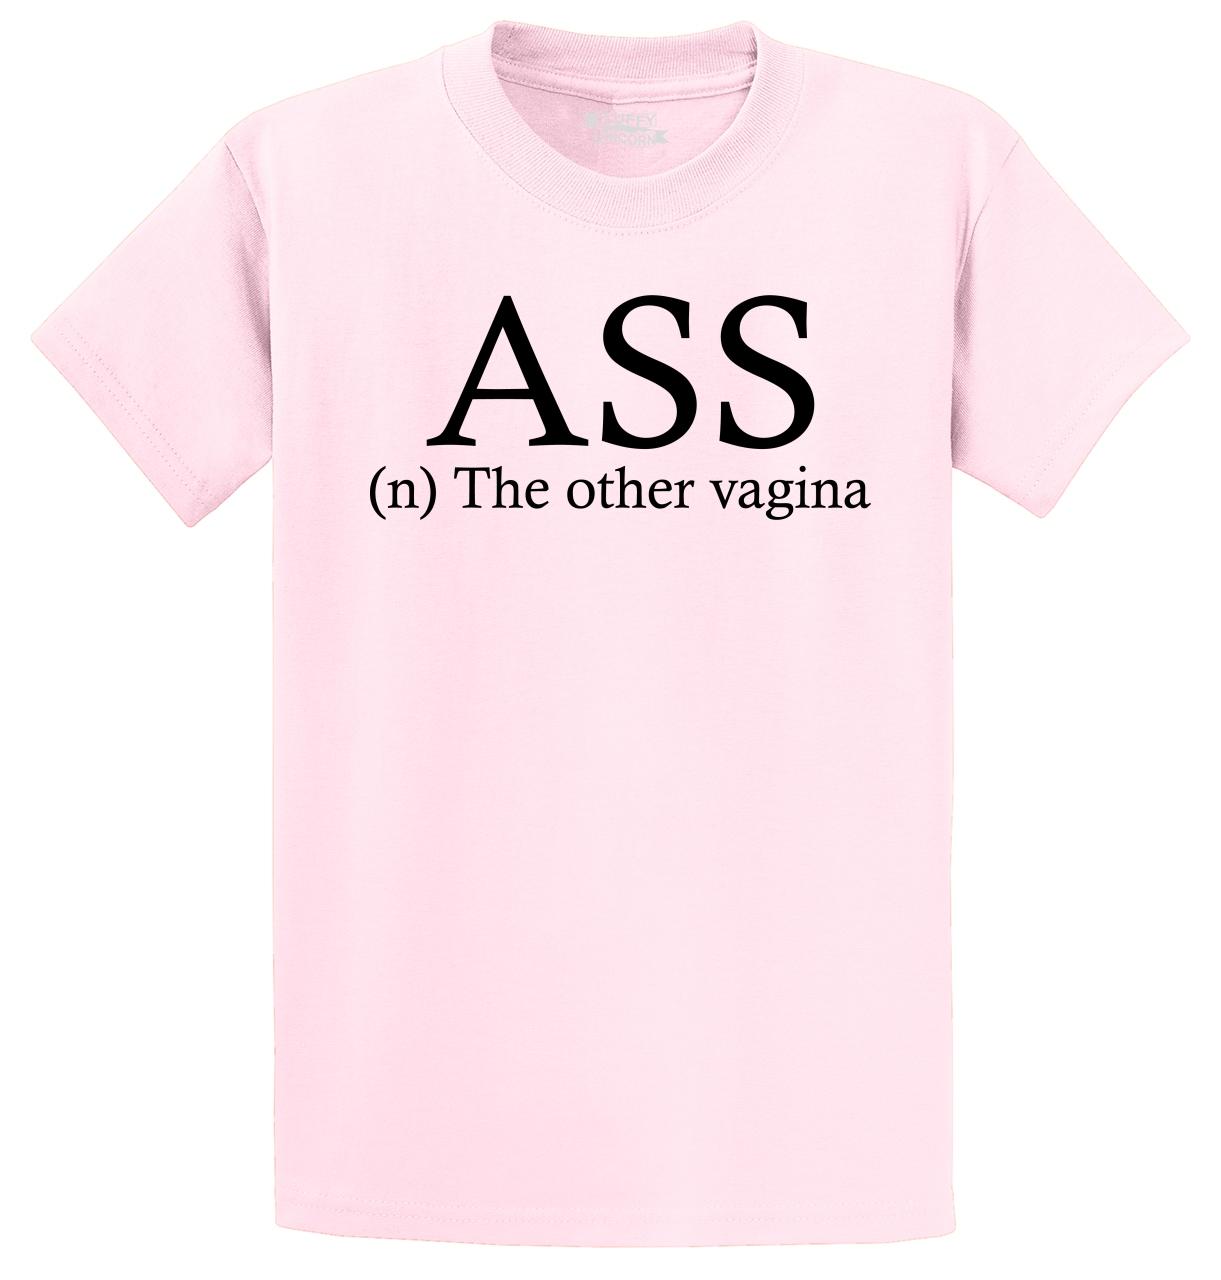 Ss The Other Vagina Funny T Shirt Rude Sexual Adult Humor Party Tee S 5xl 16 Co Ebay